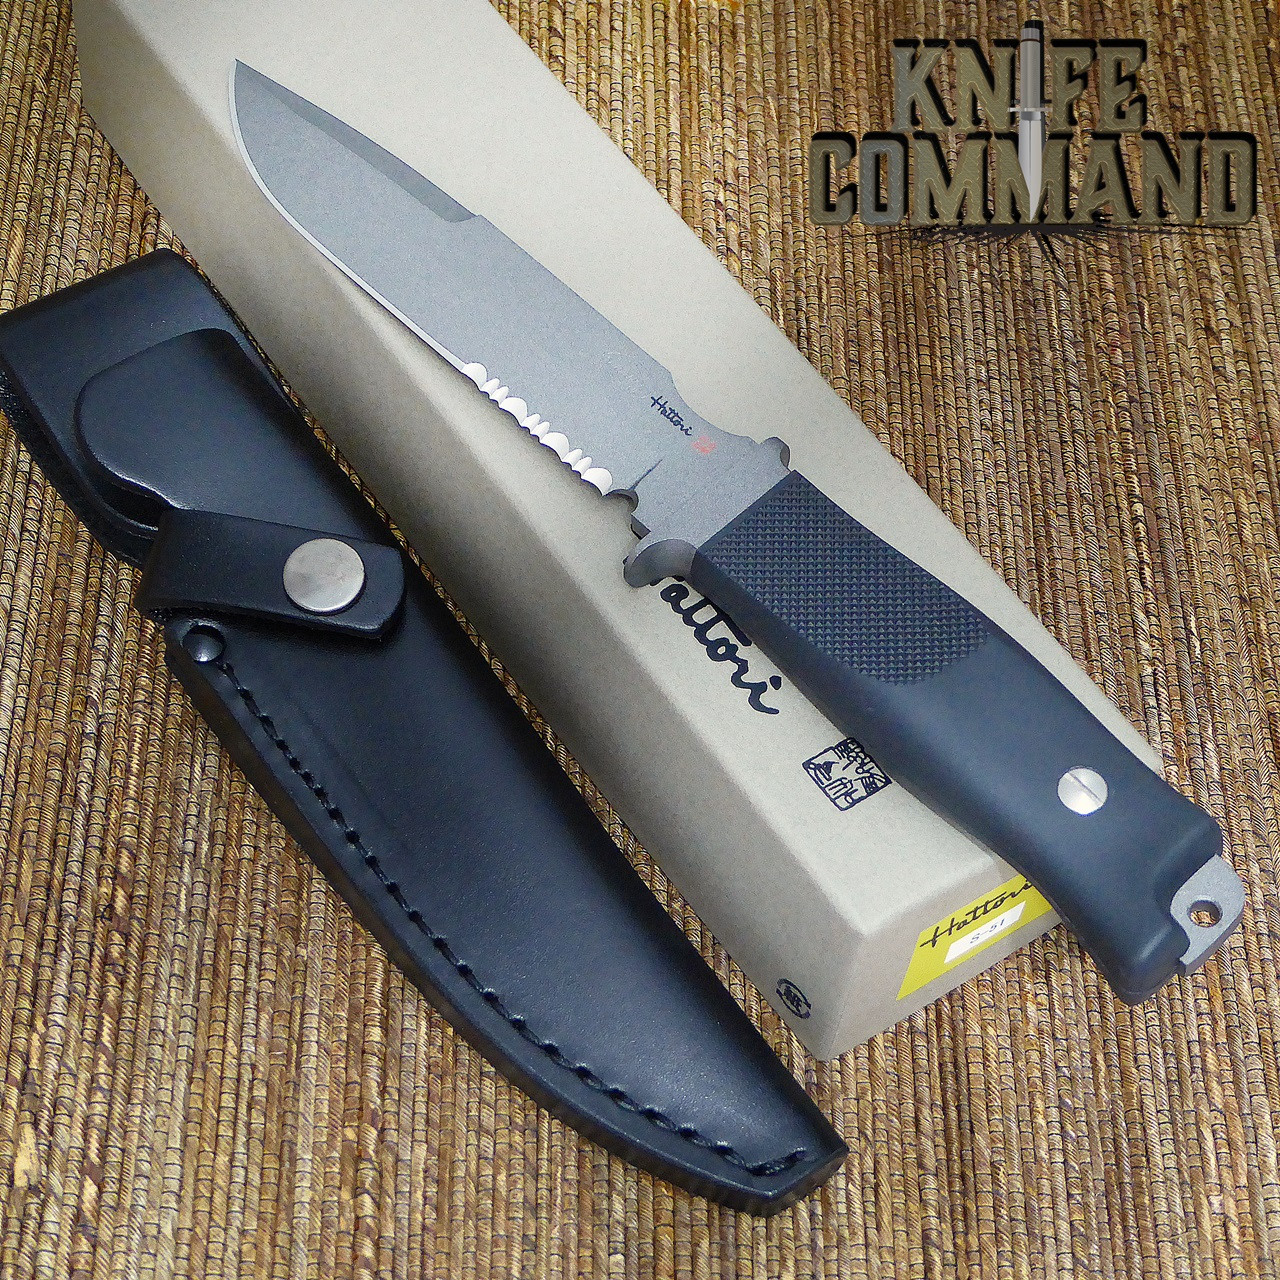 Hattori Knives Model S-51 Sea Commander Combat Military and Dive Knife.  Textured rubber handle with exposed tang/lanyard hole.